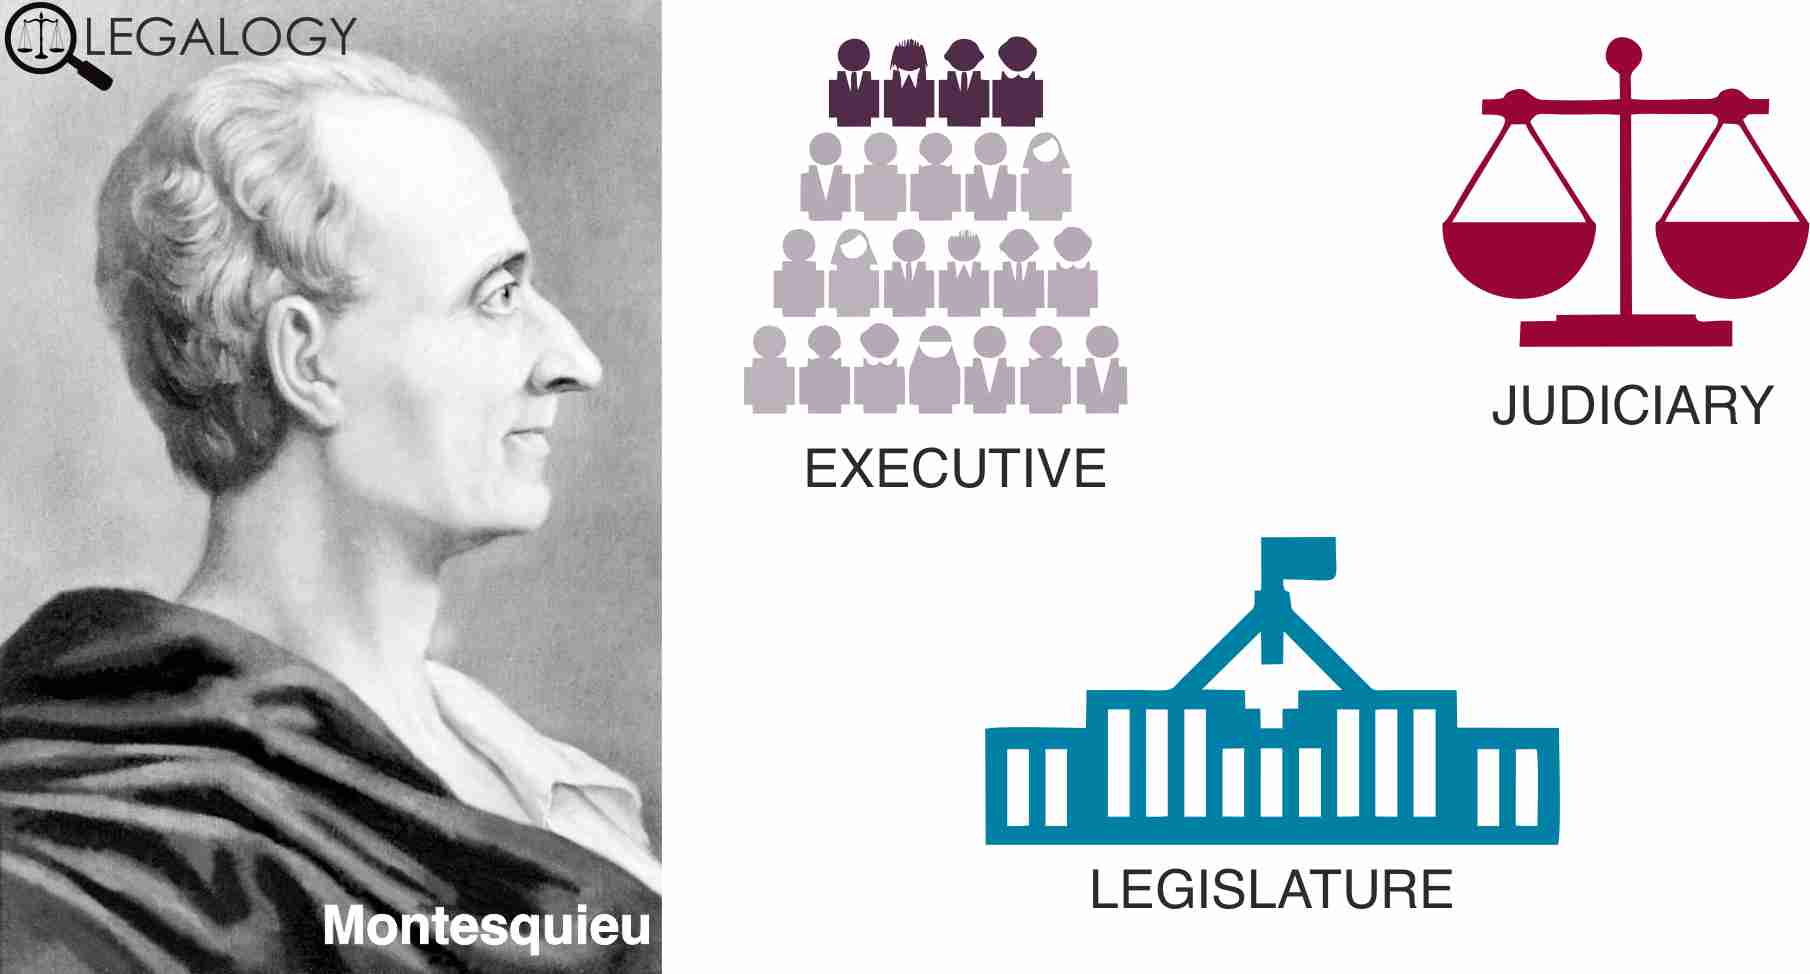 montesquieu-s-theory-of-separation-of-powers-legalogy